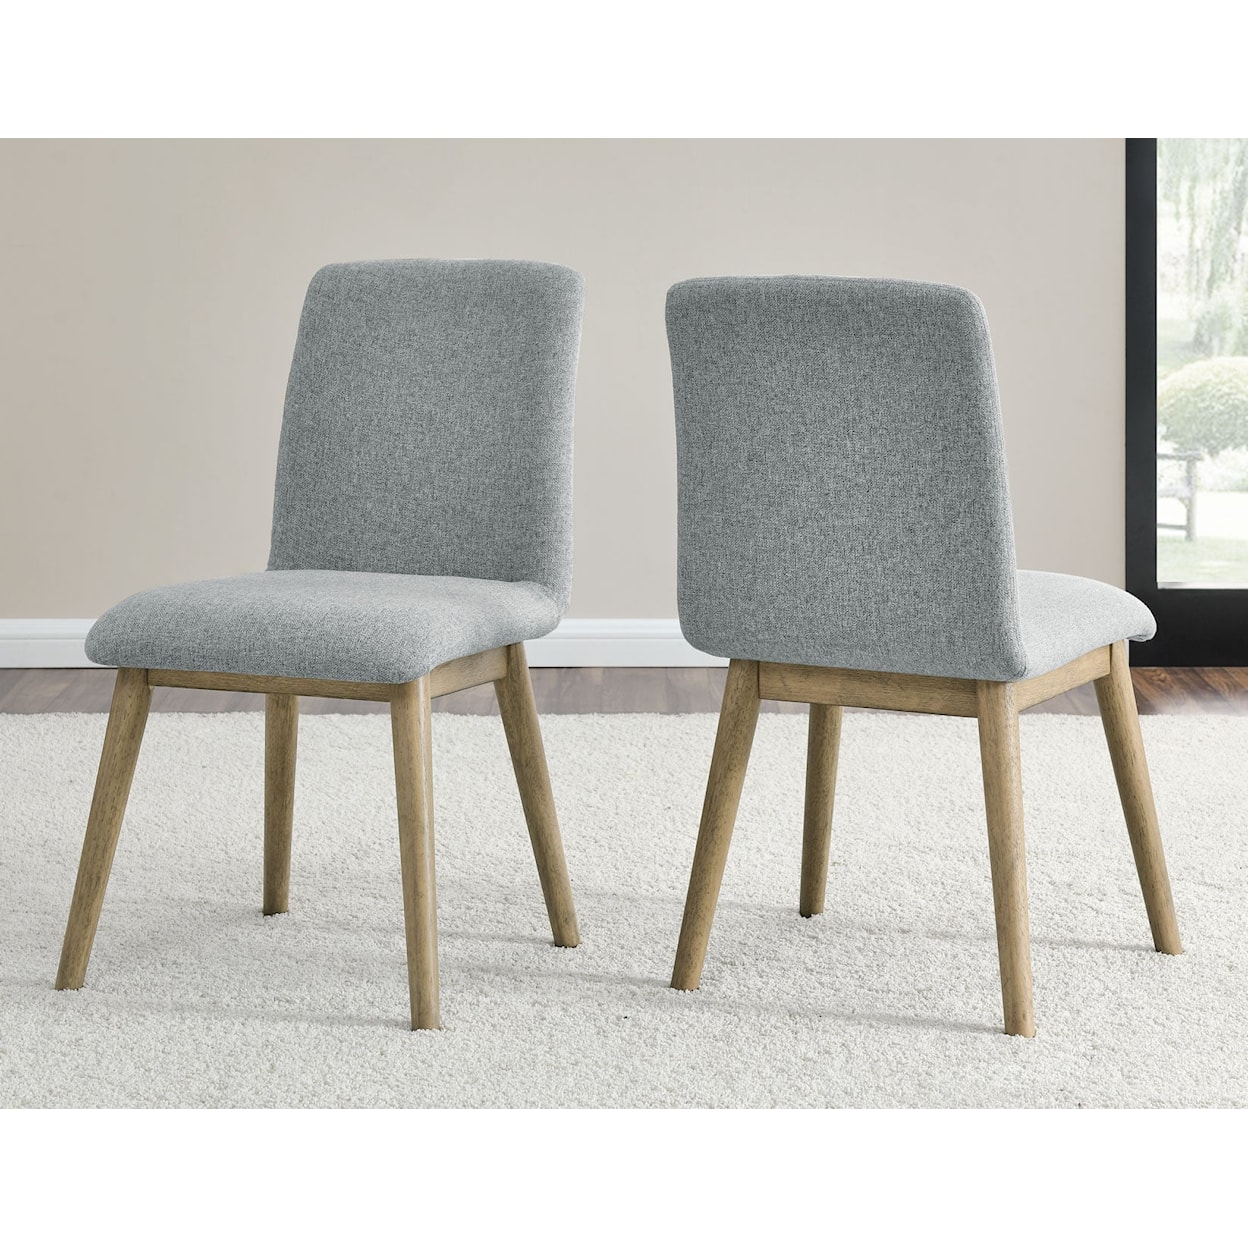 Belfort Essentials Norwood Mid-Century Modern Upholstered Dining Chair